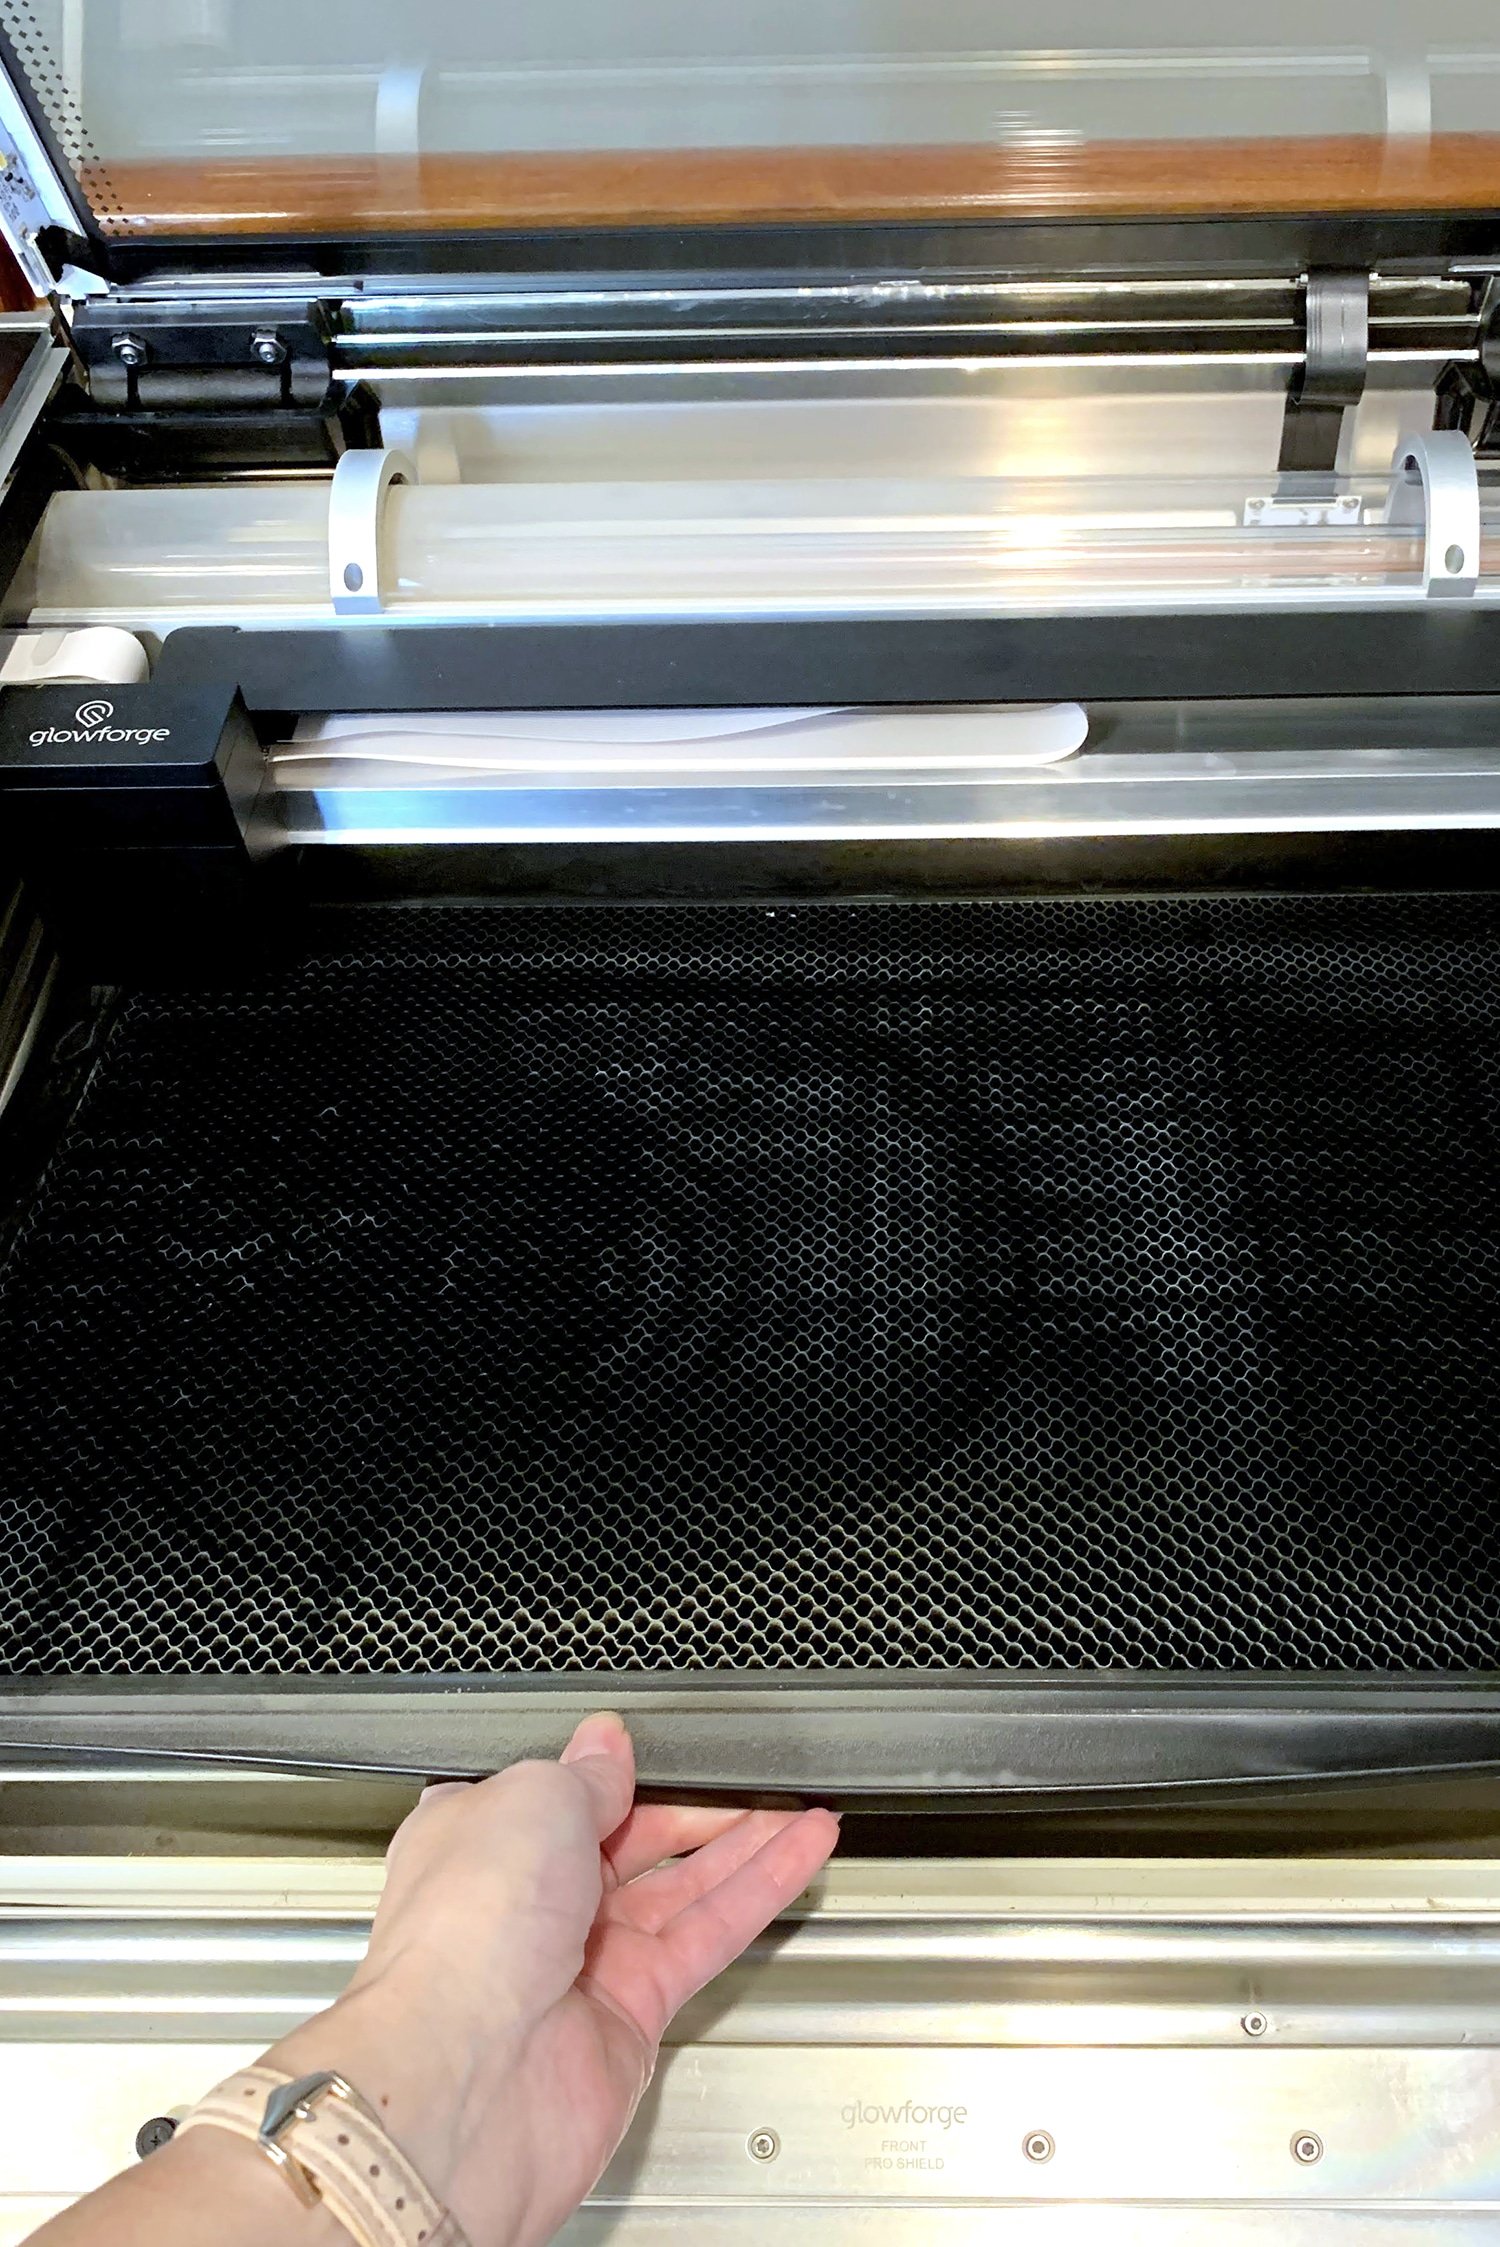 Hand removing the crumb tray from Glowforge machine